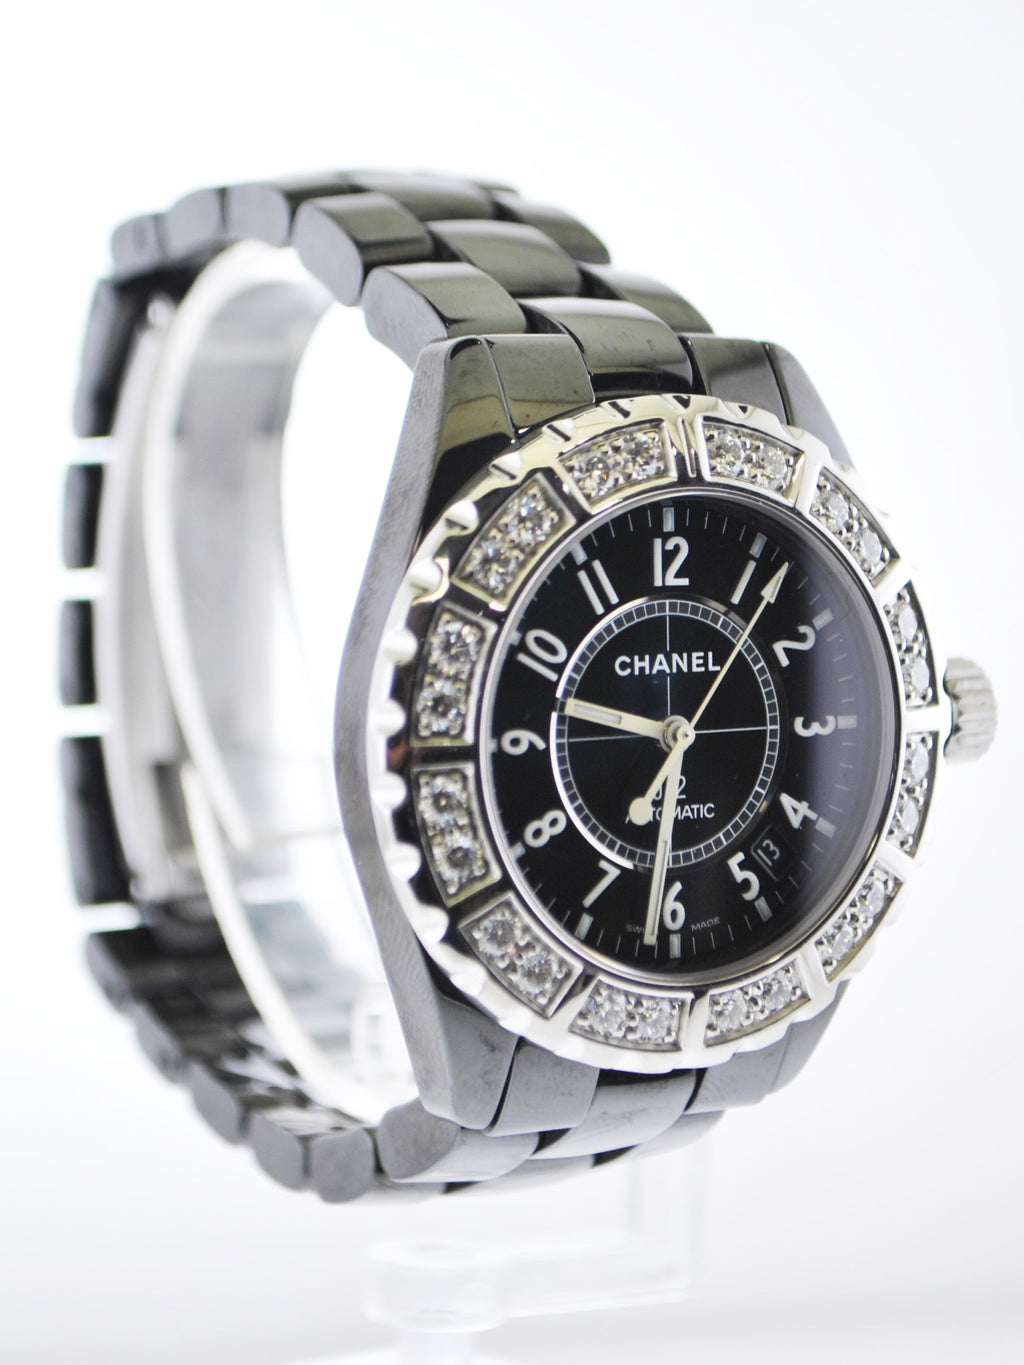 CHANEL J12 Diamond Automatic Wristwatch in Stainless Steel and Black  Ceramic - $25K VALUE w/ CoA!